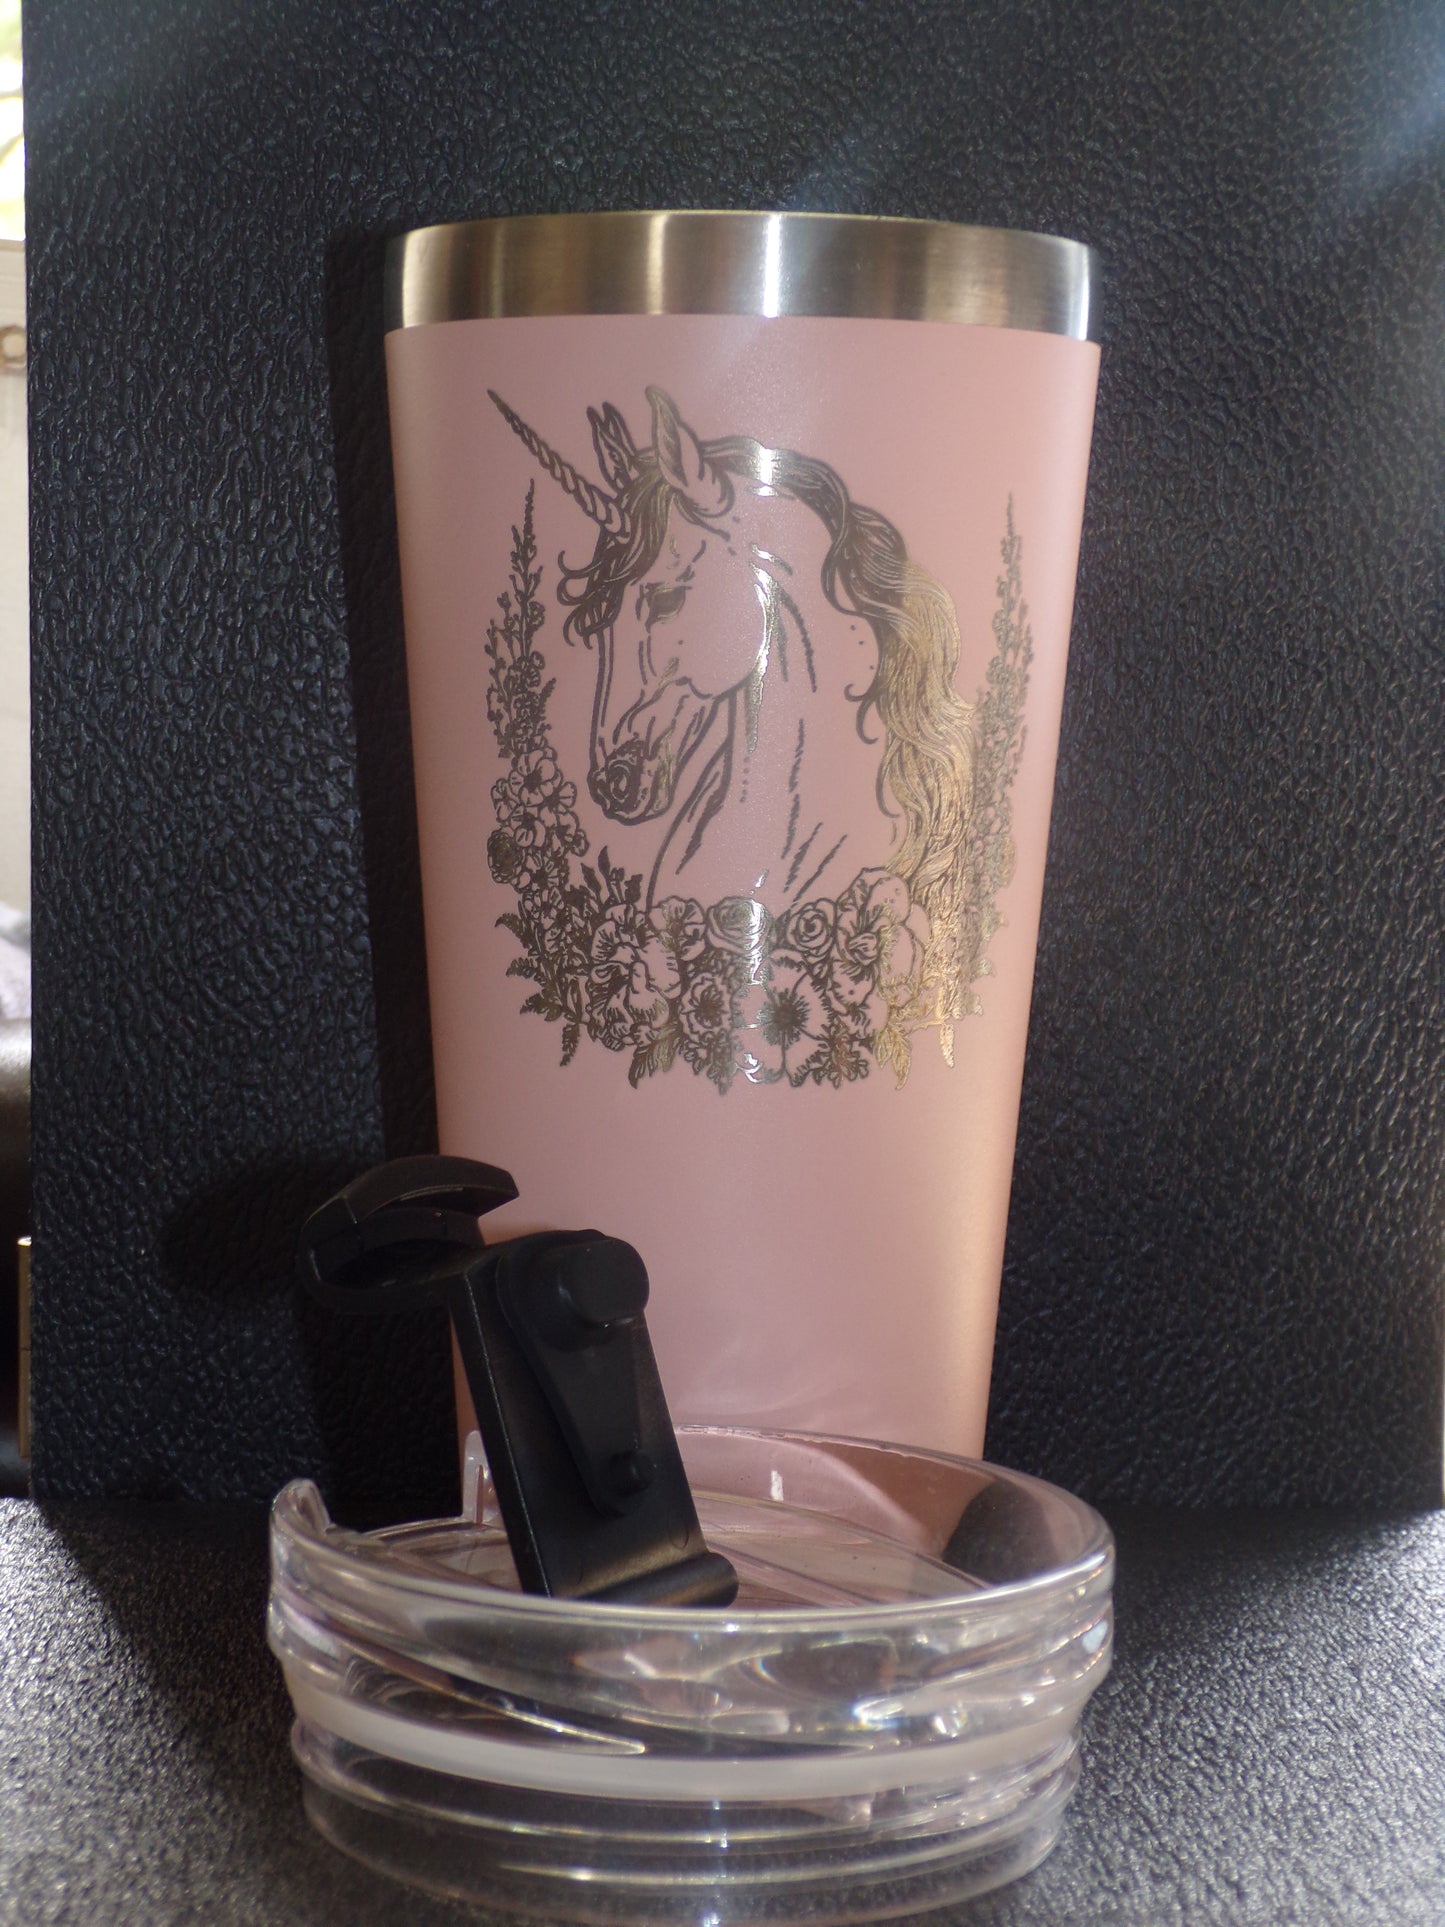 22oz Tumbler / Coffee Mug with lid Engraved Unicorn with floral wreath